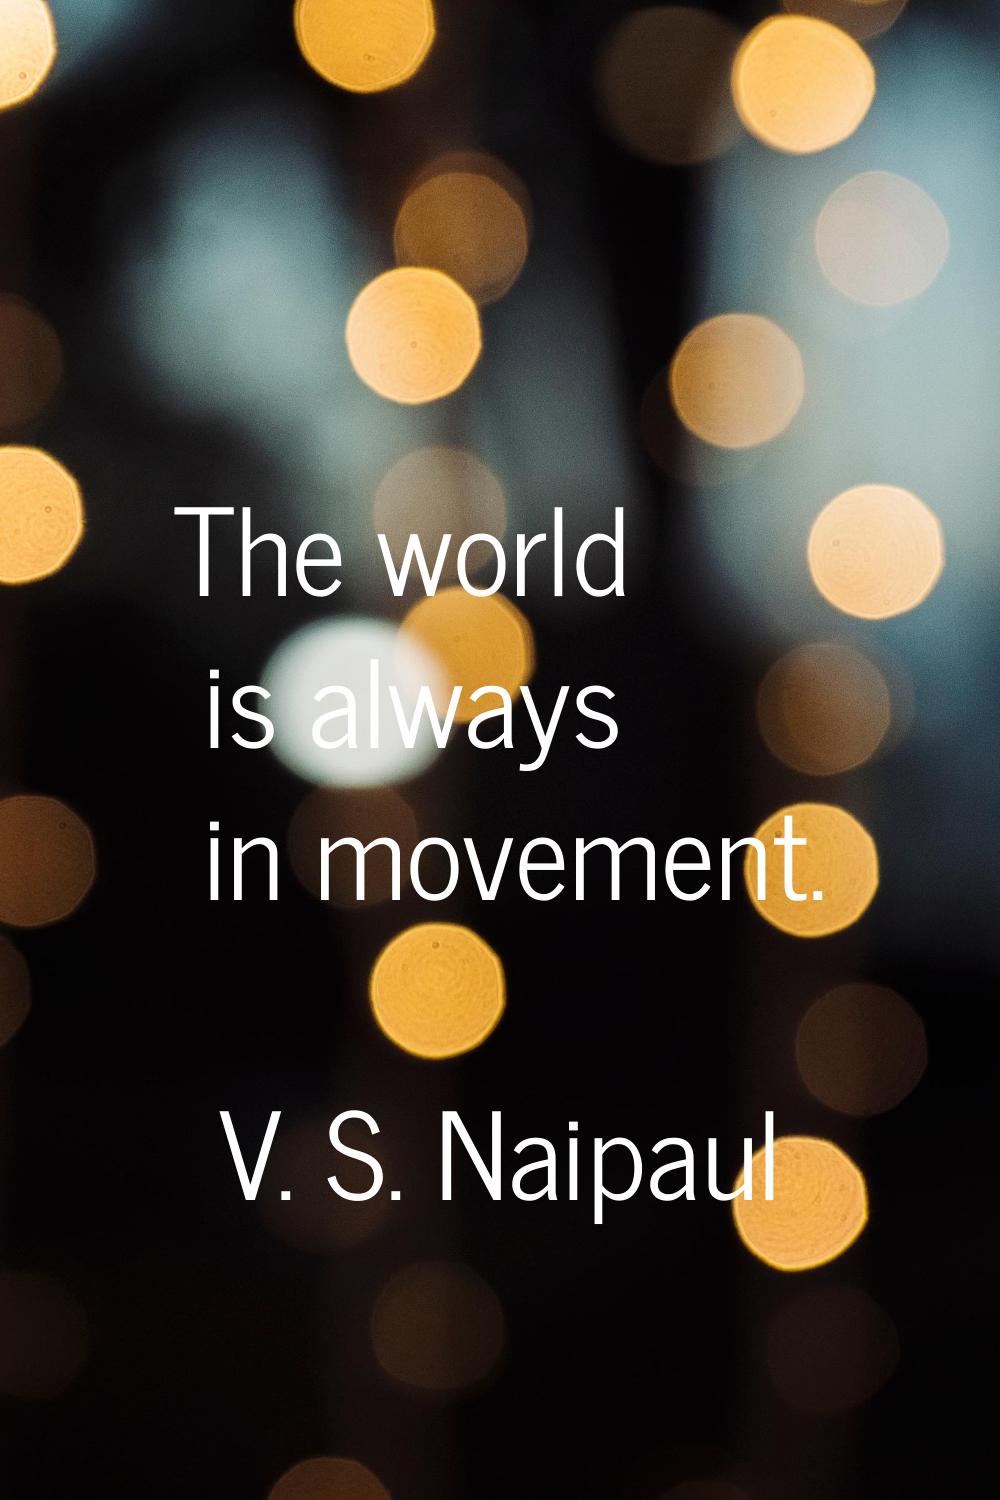 The world is always in movement.